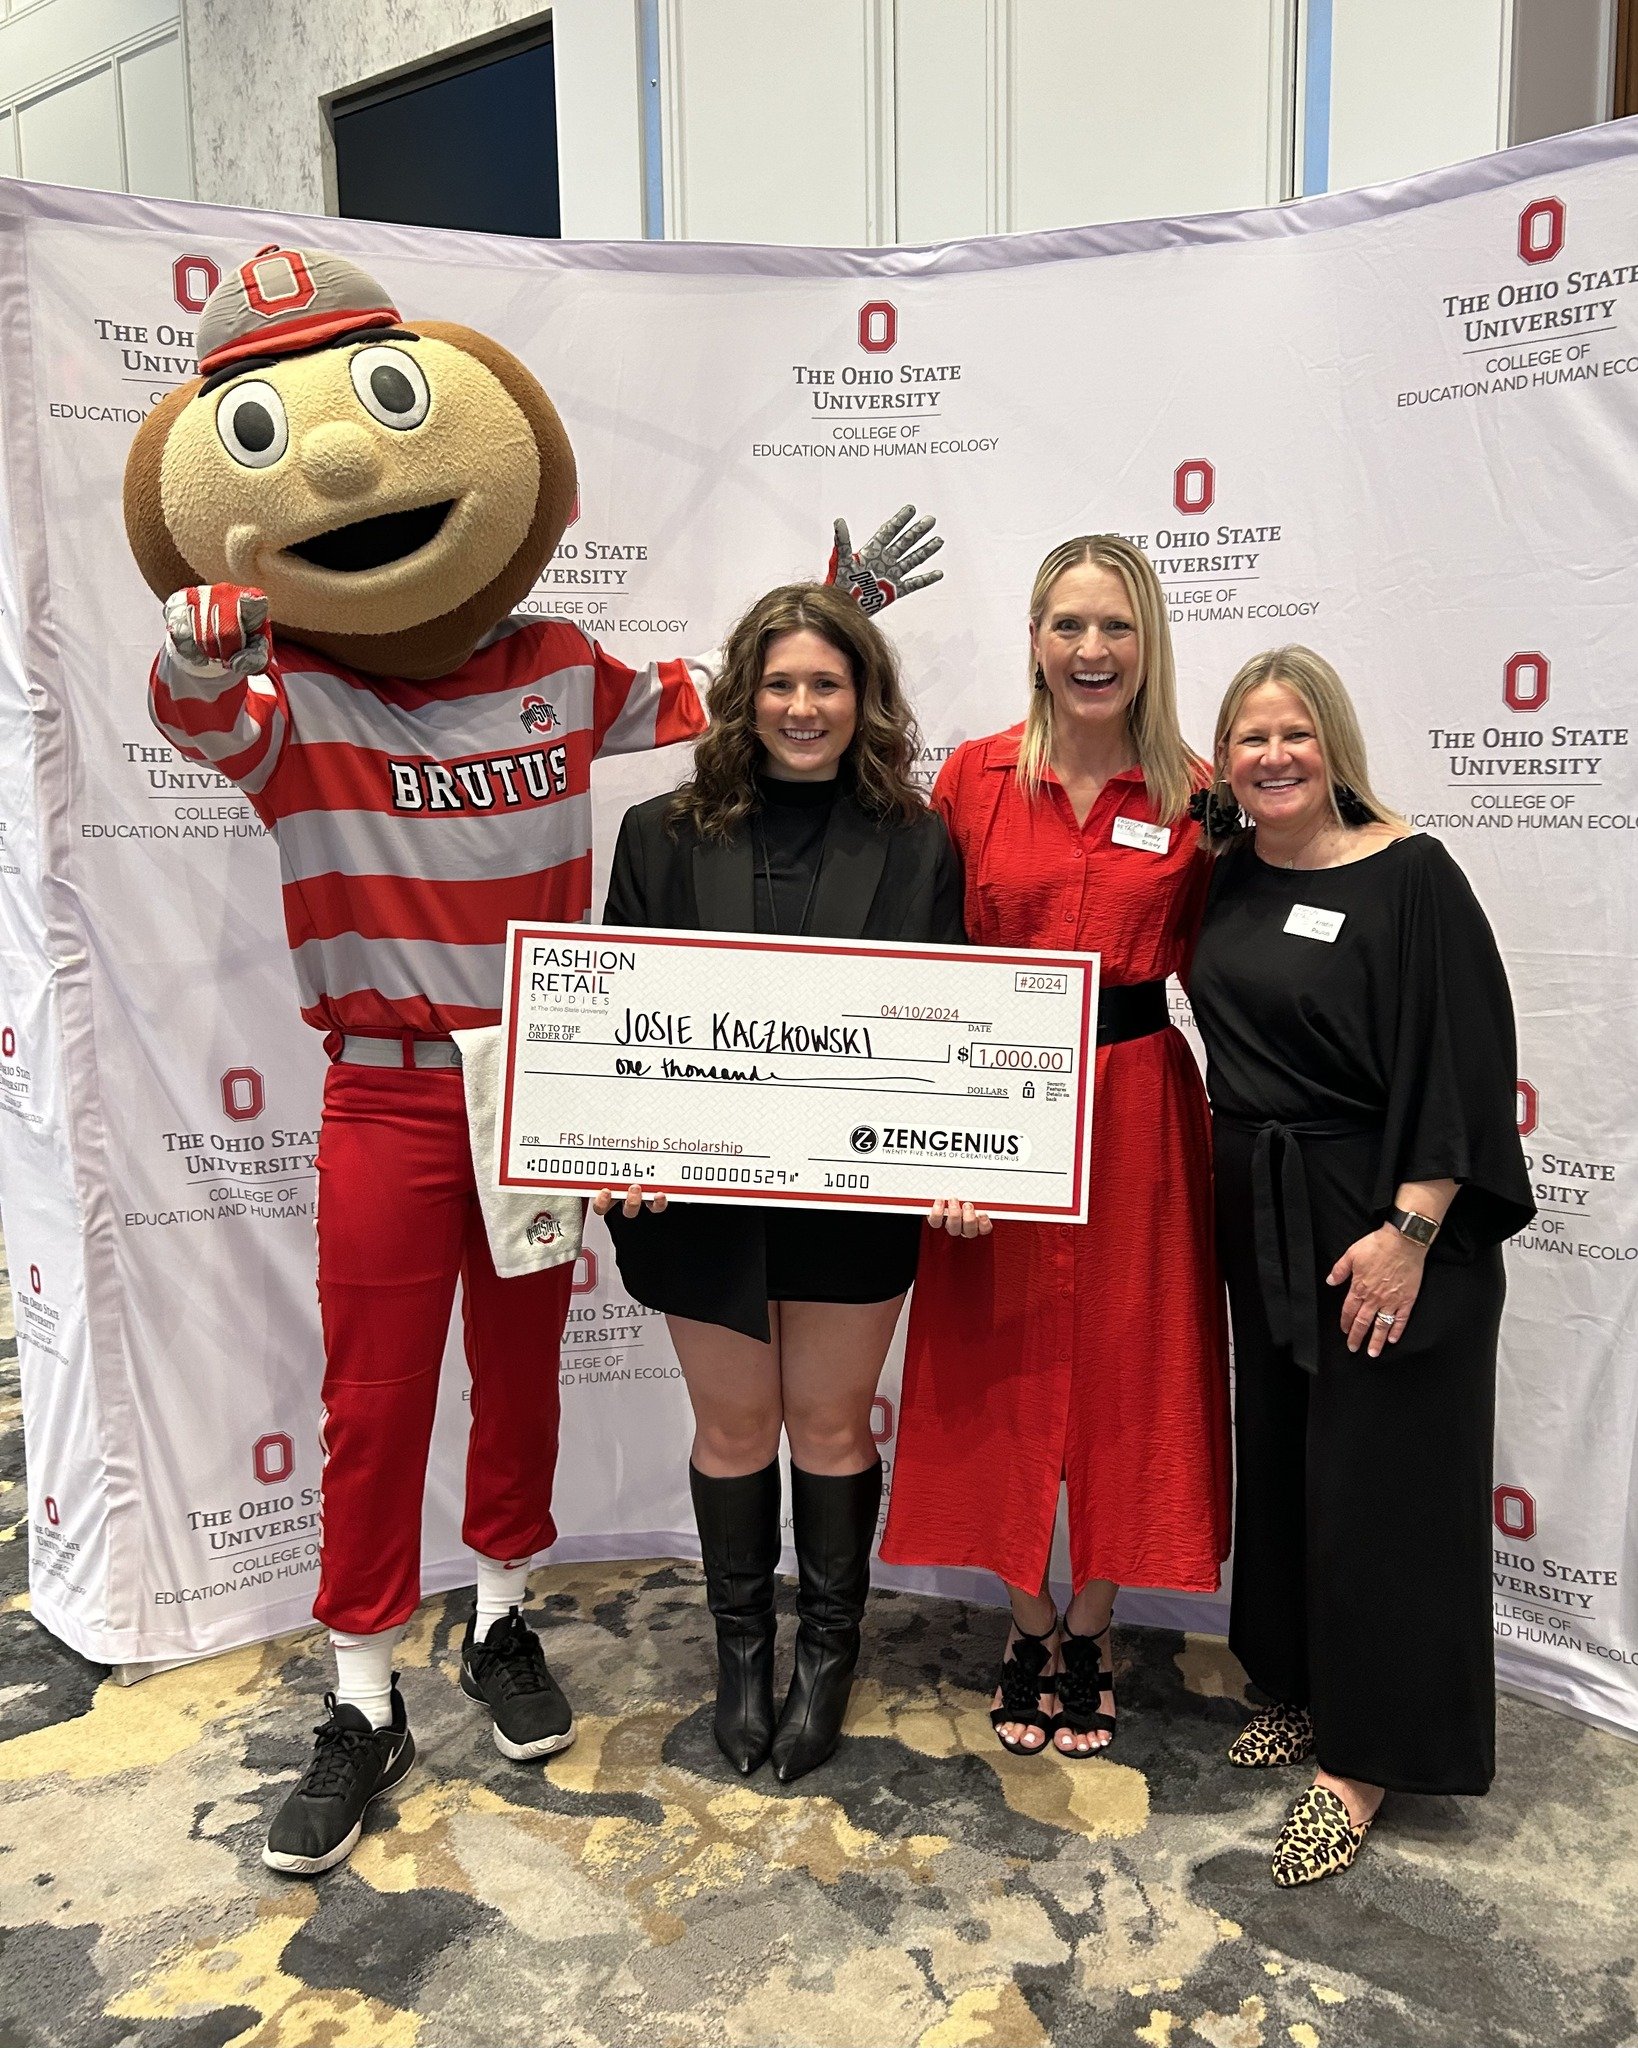 Congratulations, Josie!

We had the pleasure of awarding a Fashion + Retail Studies Internship Scholarship to Josie Kaczkowski at the Fashion Retail Exchange. Hosted by CBUS Retail and the Ohio State Fashion &amp; Retail Studies program, this annual 